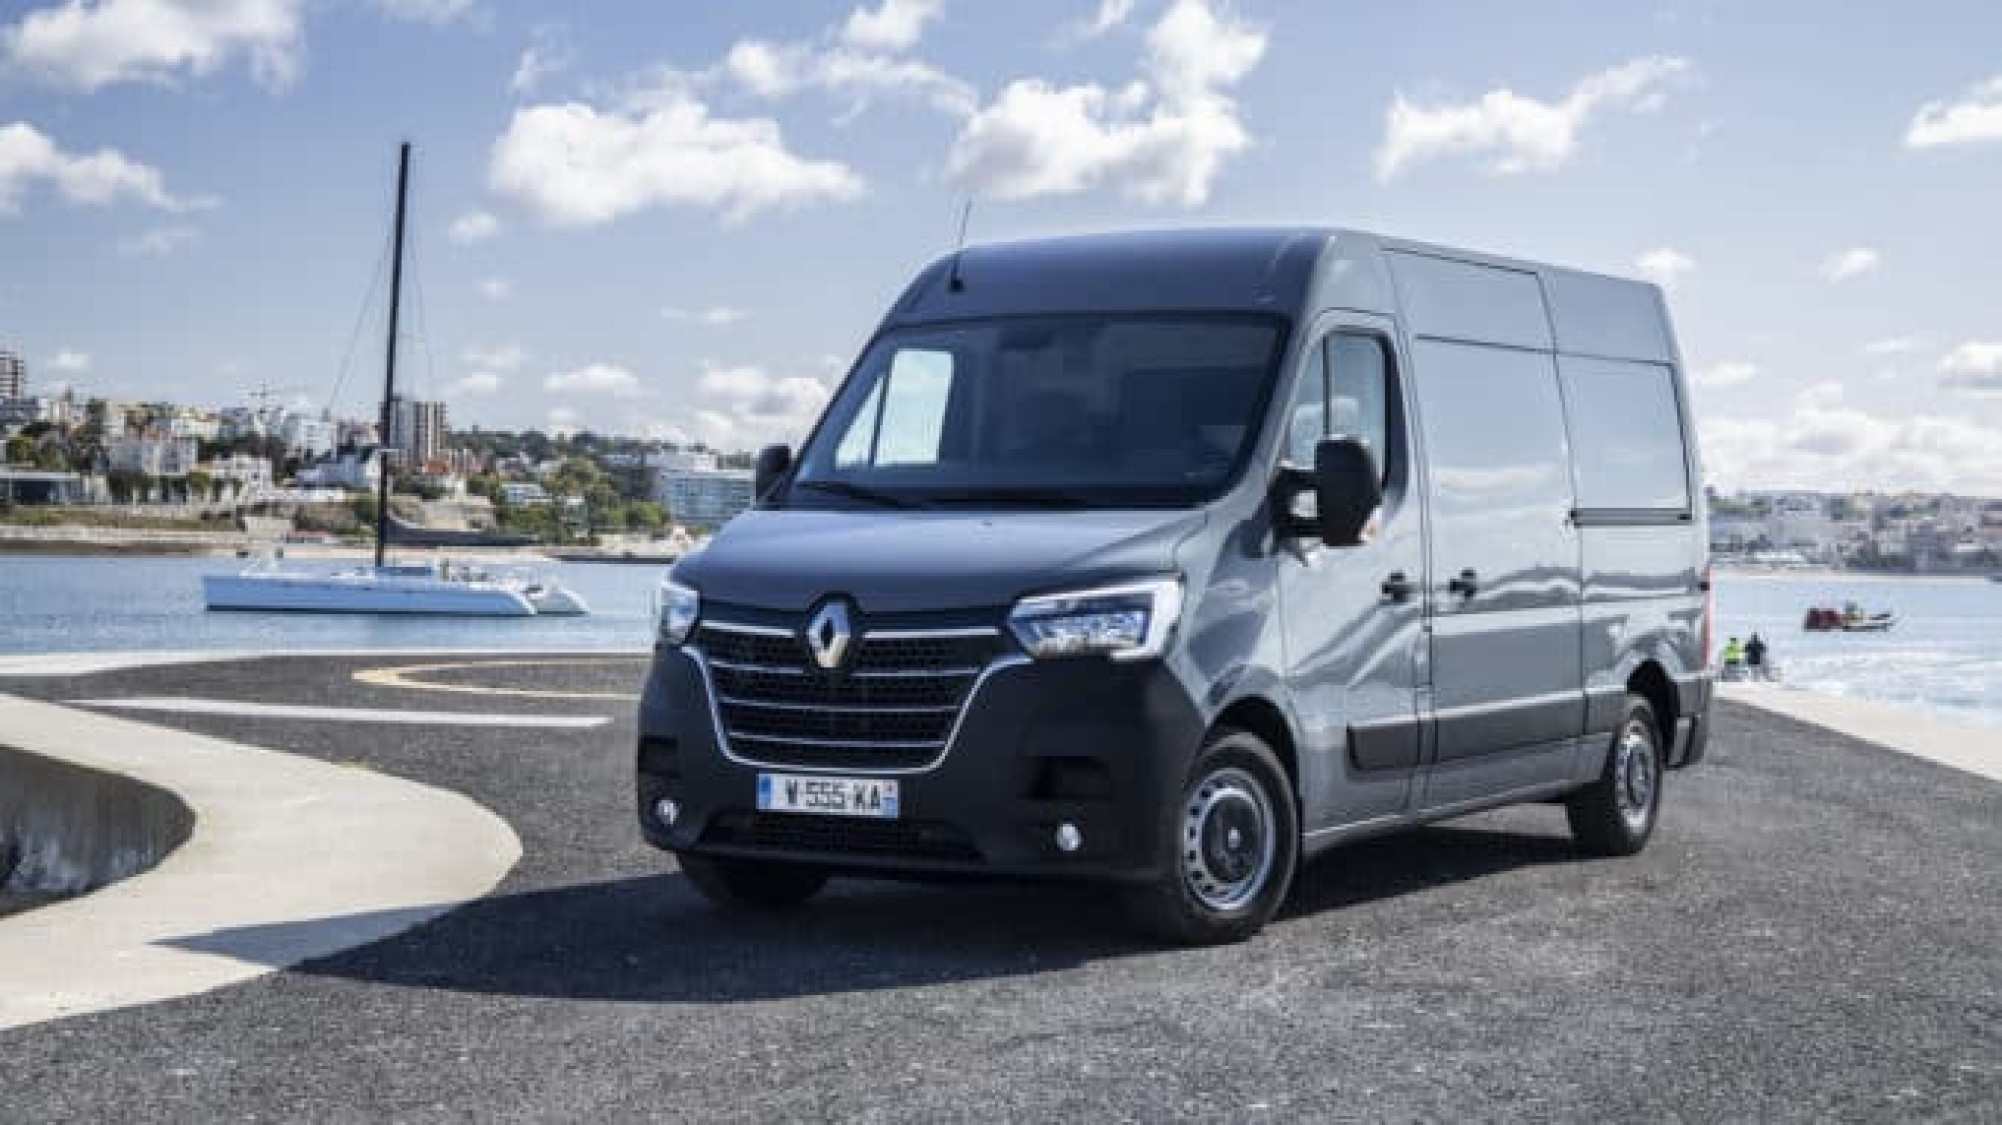 Fichiers Tuning Haute Qualité Renault Master 2.3 BlueDCI 150hp